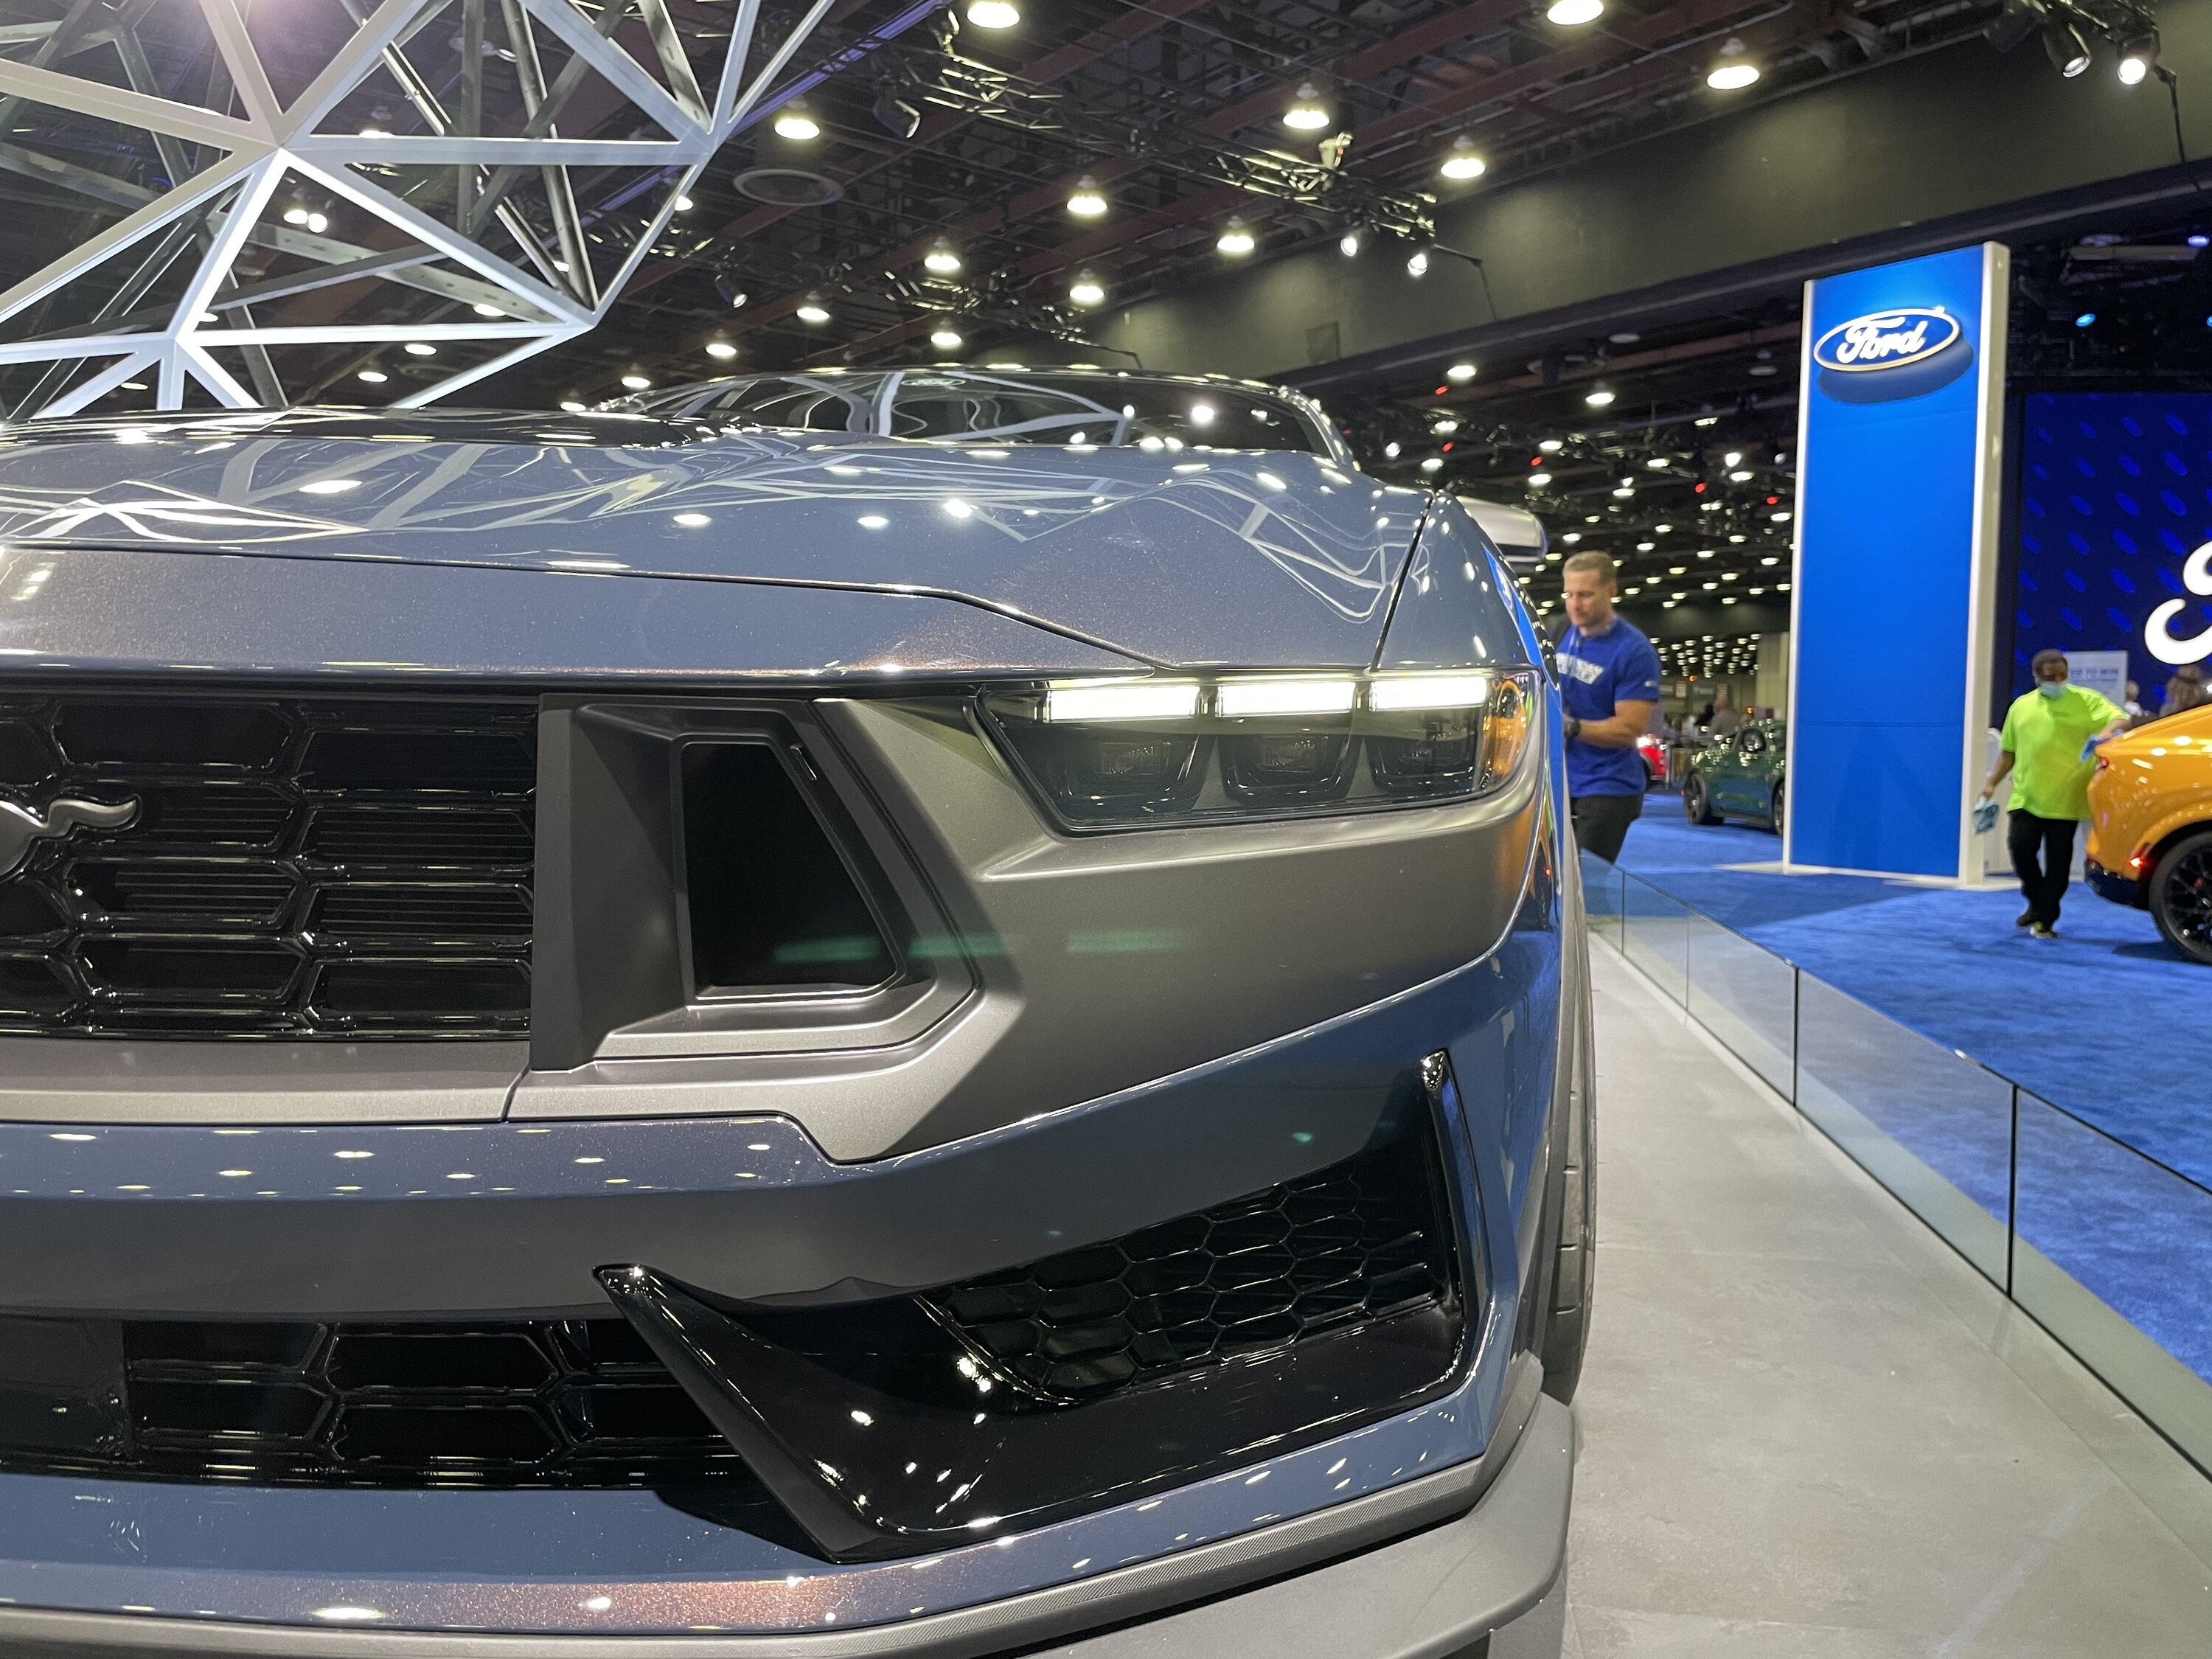 S650 Mustang S650 pics from reveal night and showfloor of 2022 Detroit Auto Show d8f8cb2c-d971-4b44-be4b-1bb55d2d84f1-jpeg-